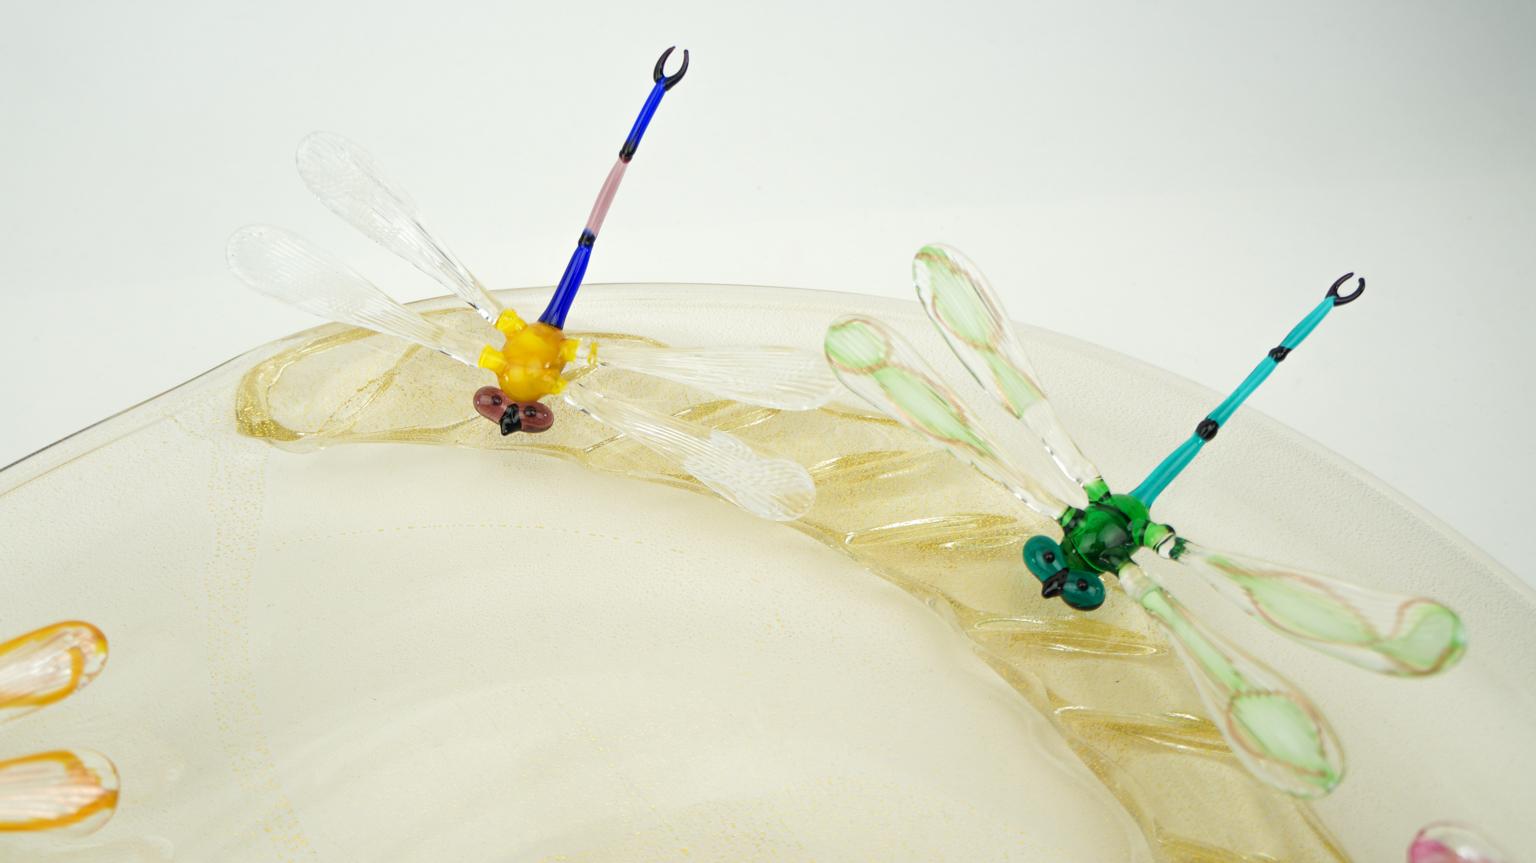 Verre d'art Costantini The Modernity Murano Glass Made Murano Glass with Dragonflies (assiette en verre de Murano Glass en or véritable) en vente